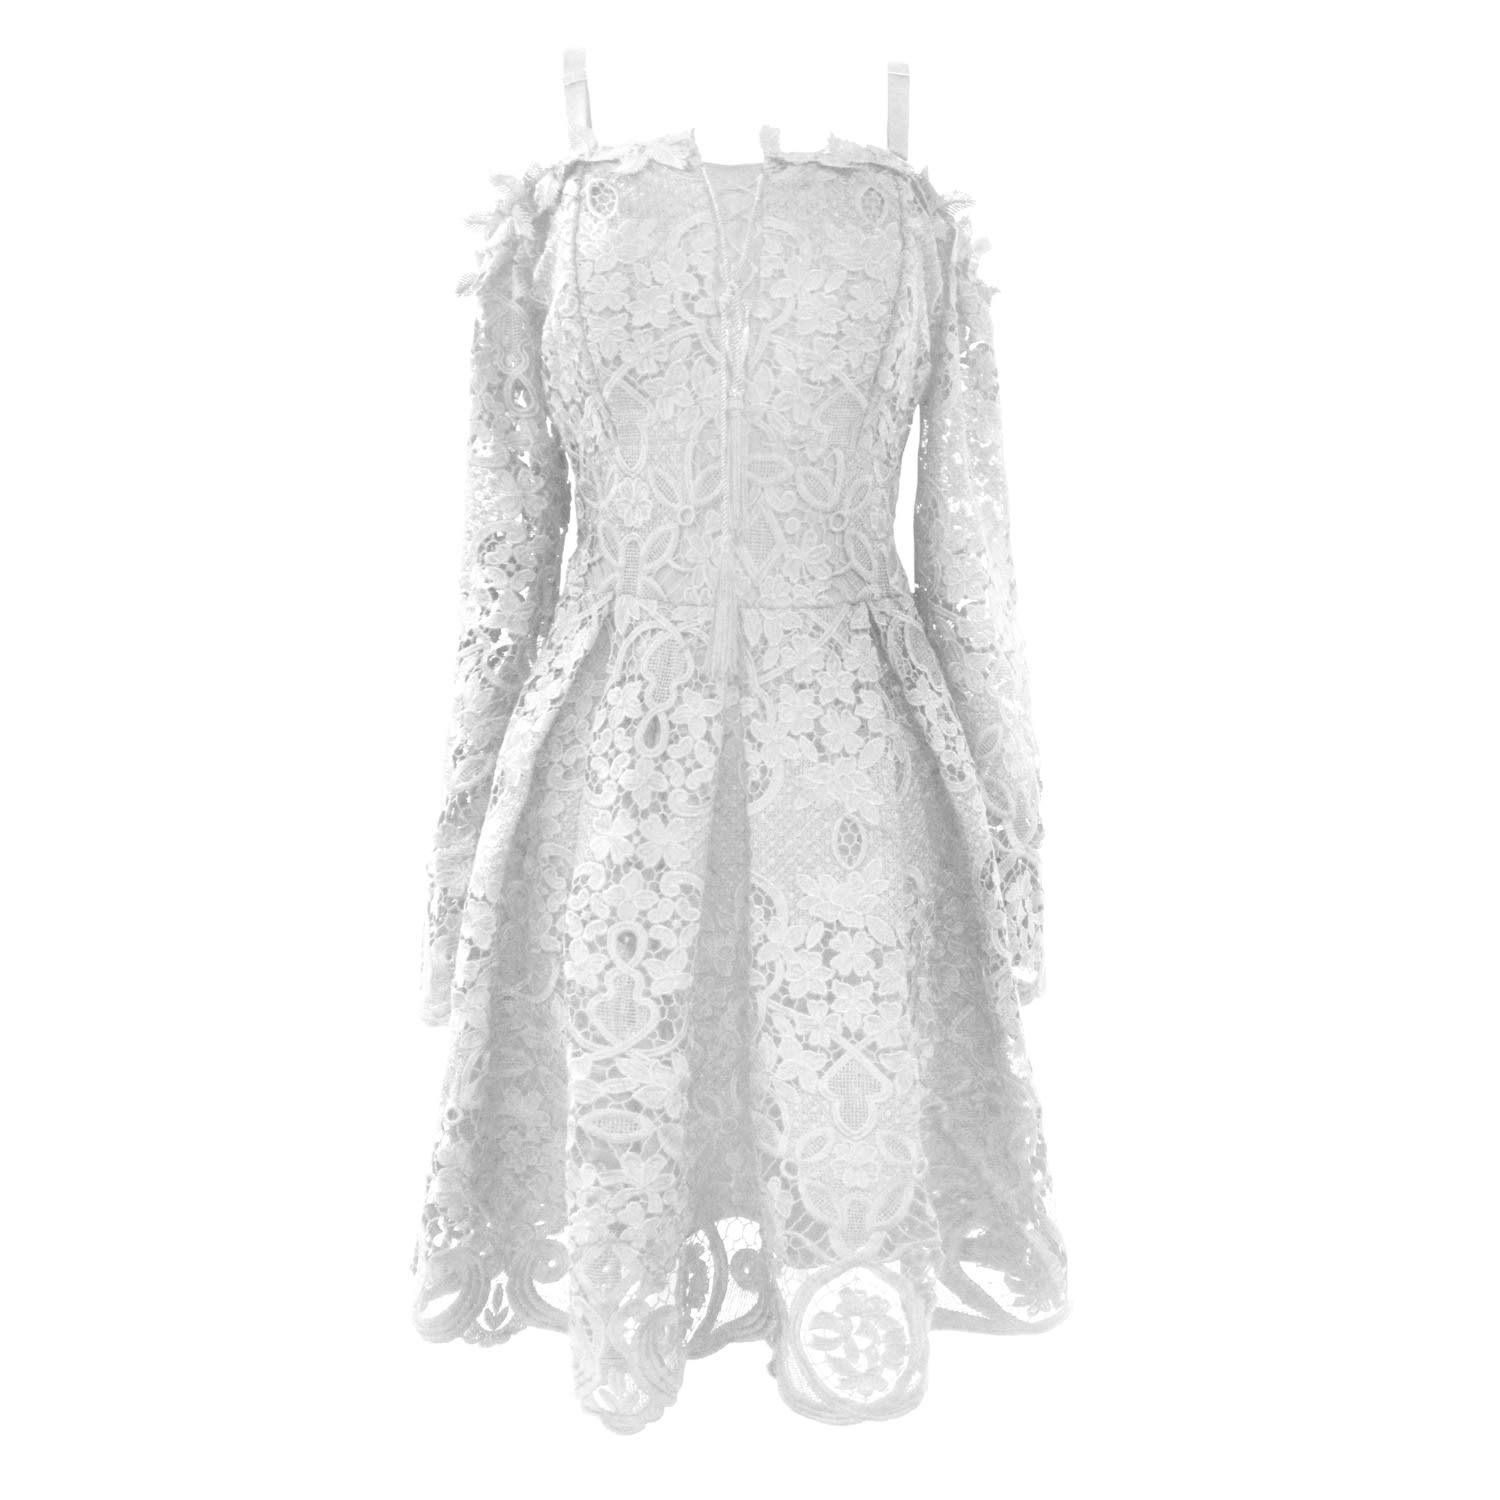 Smart And Joy Women's Adjusted And Flared Lace Dress With Off-shoulders - White In Metallic